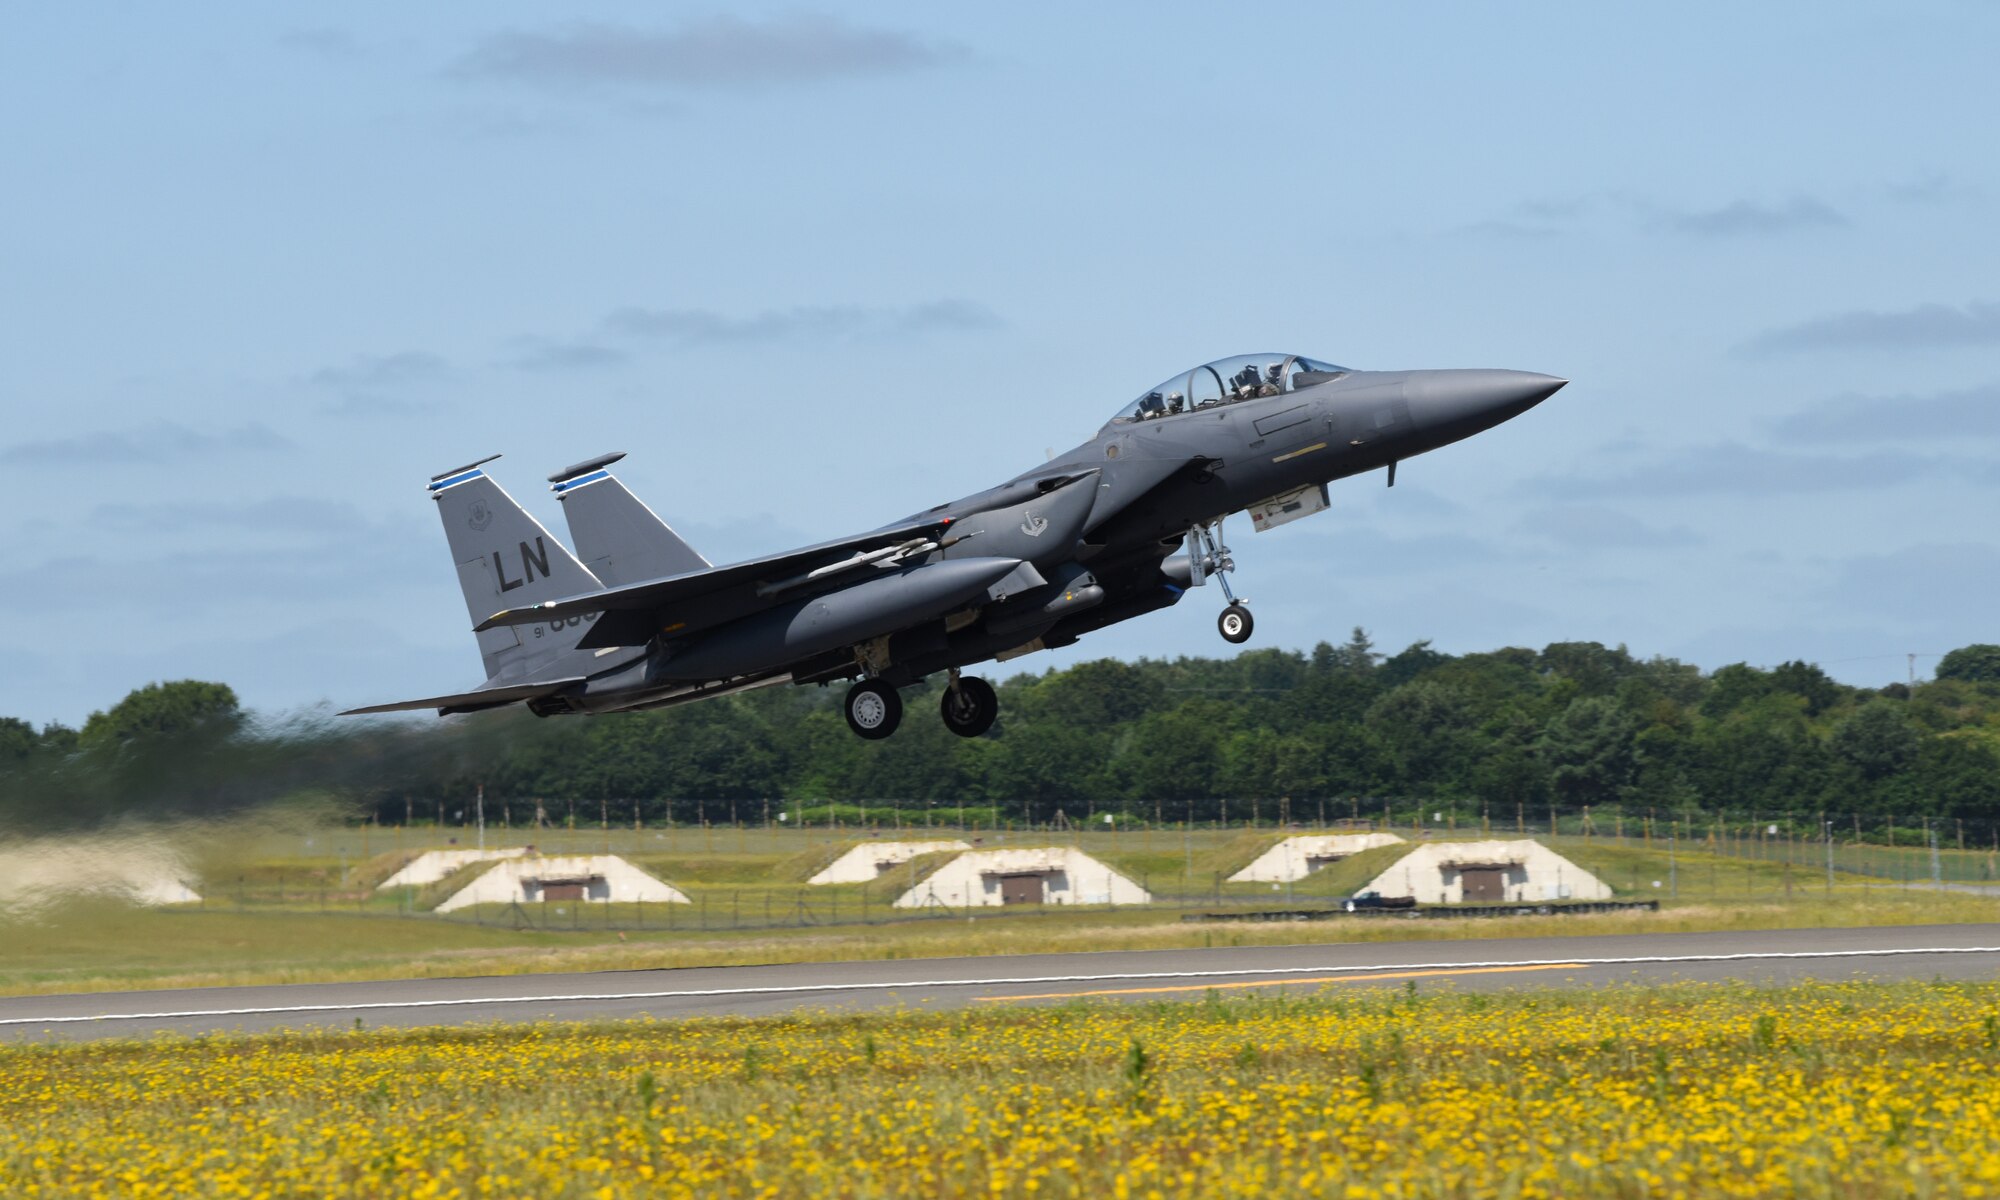 A 492nd Fighter Squadron F-15E Strike Eagle takes off during exercise Point Blank 19-2 at Royal Air Force Lakenheath, England, June 27, 2019. This trilateral exercise provides a low-cost initiative designed to increase the tactical proficiency of participating air forces. (U.S. Air Force photo by Airman 1st Class Rhonda Smith)